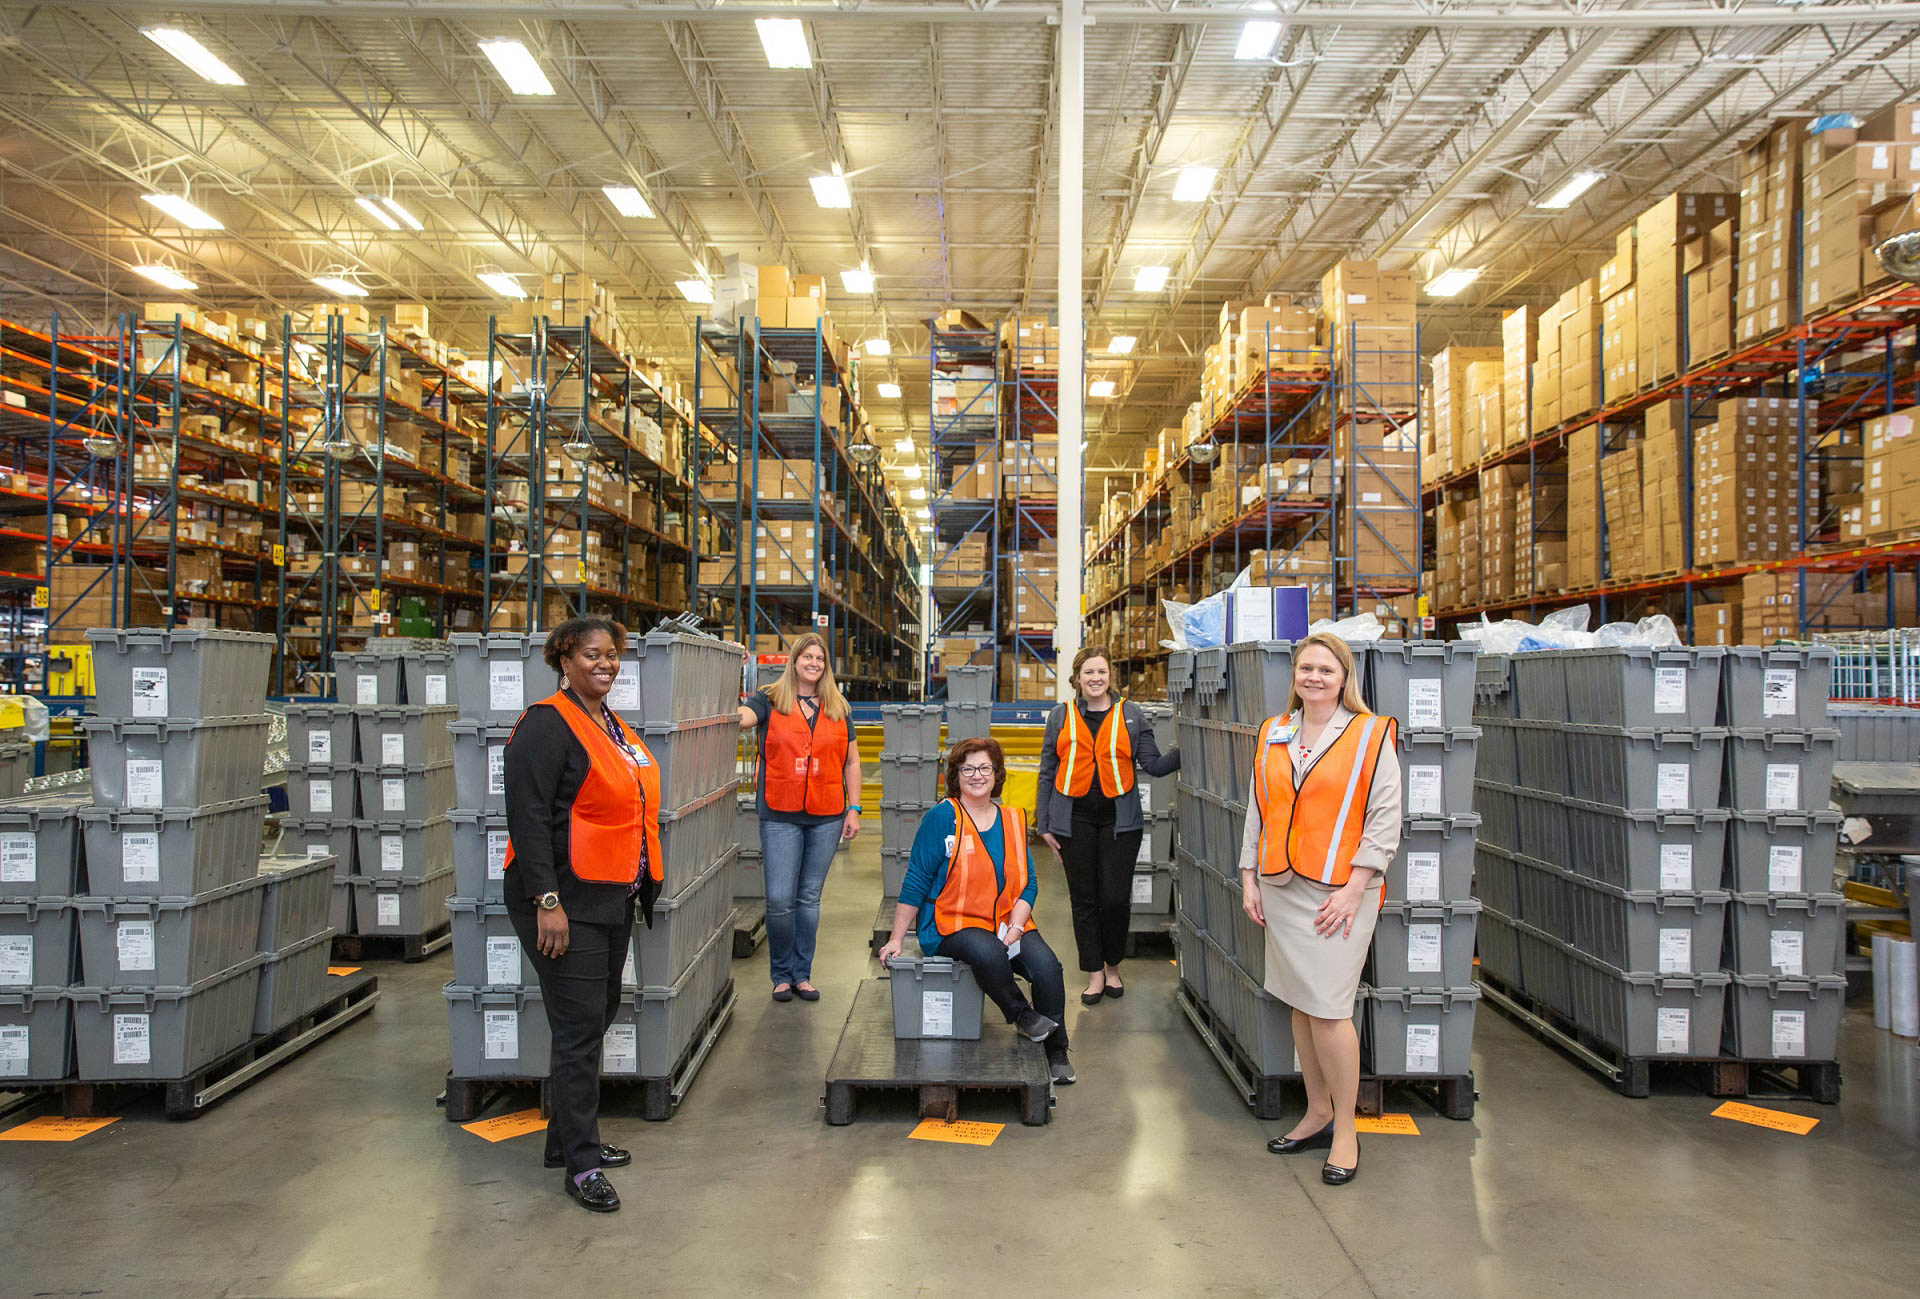 The UF Health Integrated Service Center (ISC) leadership team provides a view into their distribution center where totes are staged for delivery to the front lines.